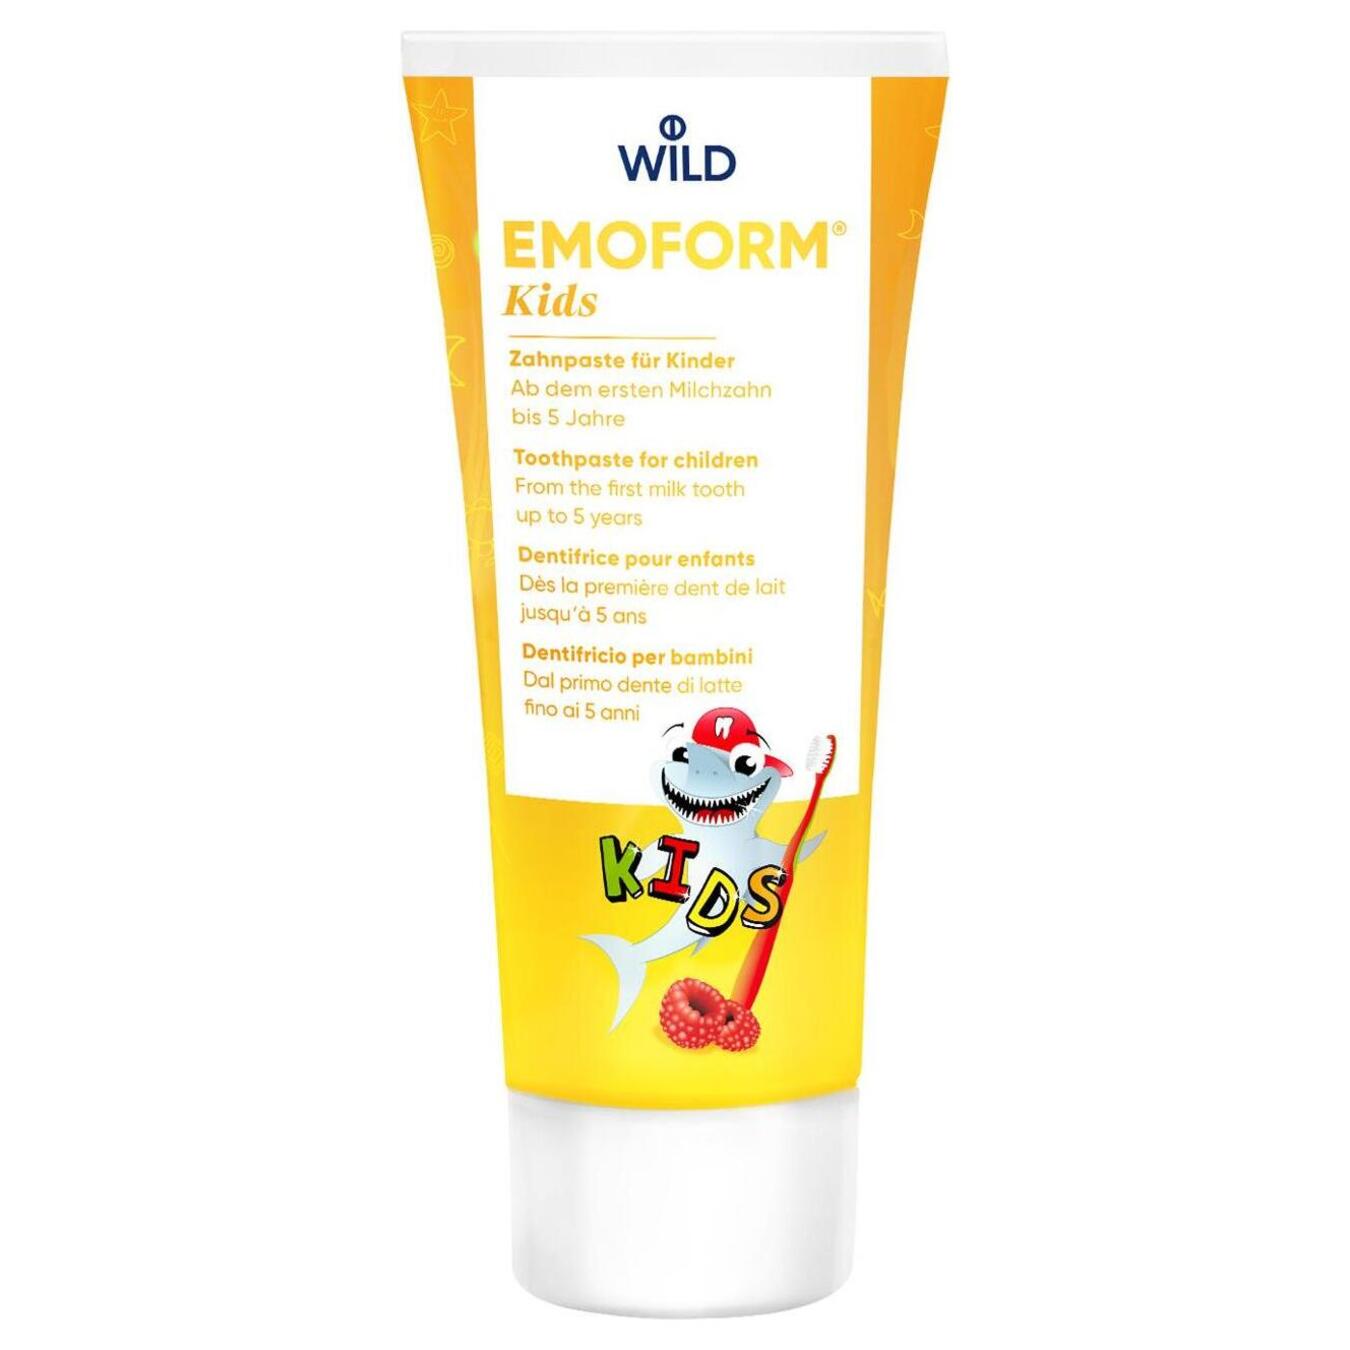 Children's toothpaste Emoform 0-5 years with sodium fluoride and tin